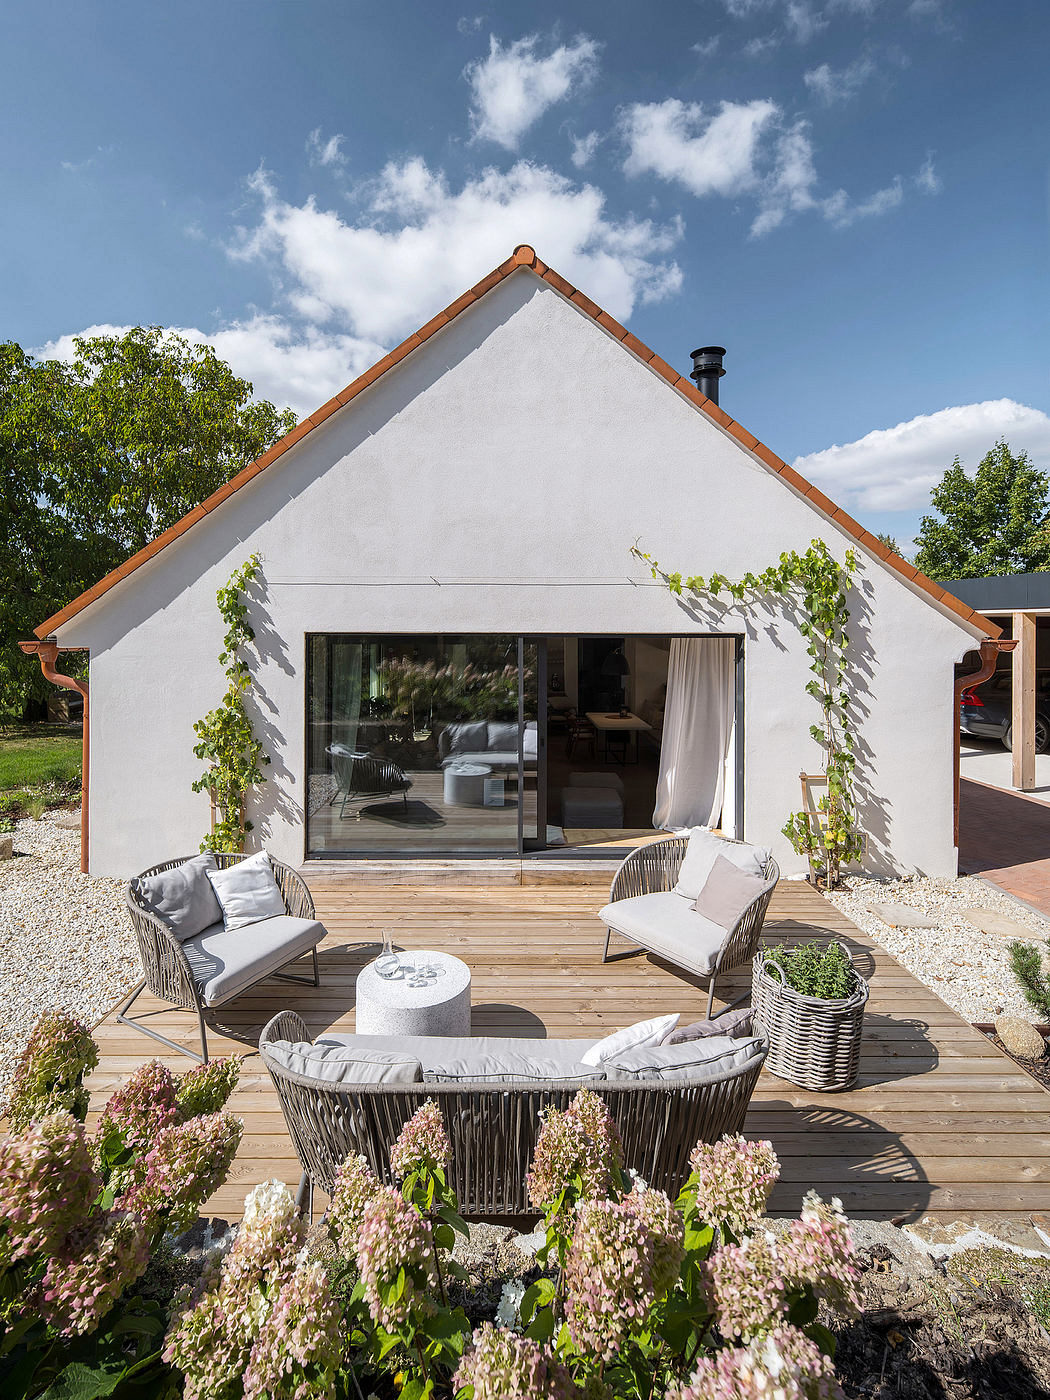 A modern white home with a large wooden deck, wicker furniture, and a floral garden.